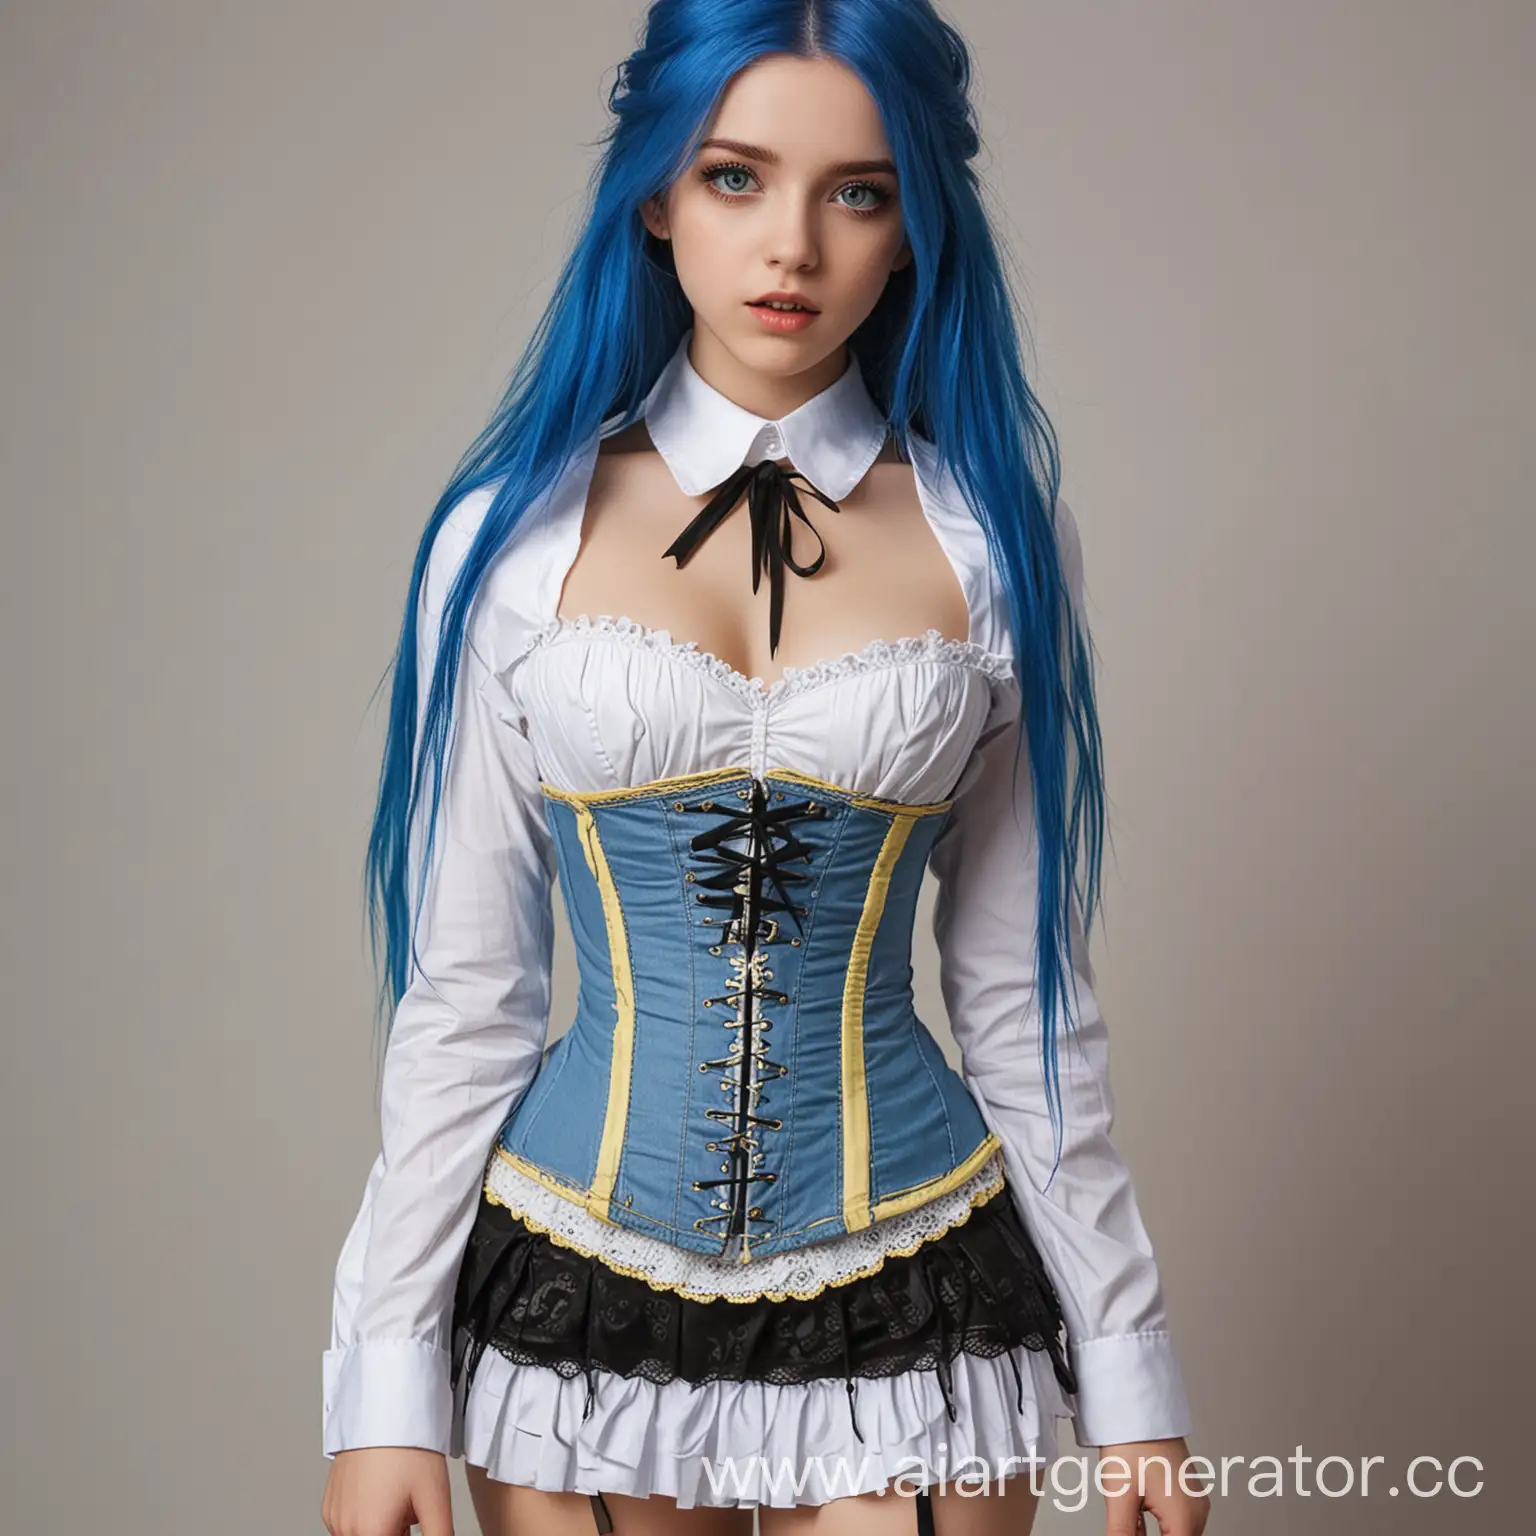 Girl-with-Blue-Long-Hair-in-White-Shirt-and-Corset-with-Mismatched-Eyes